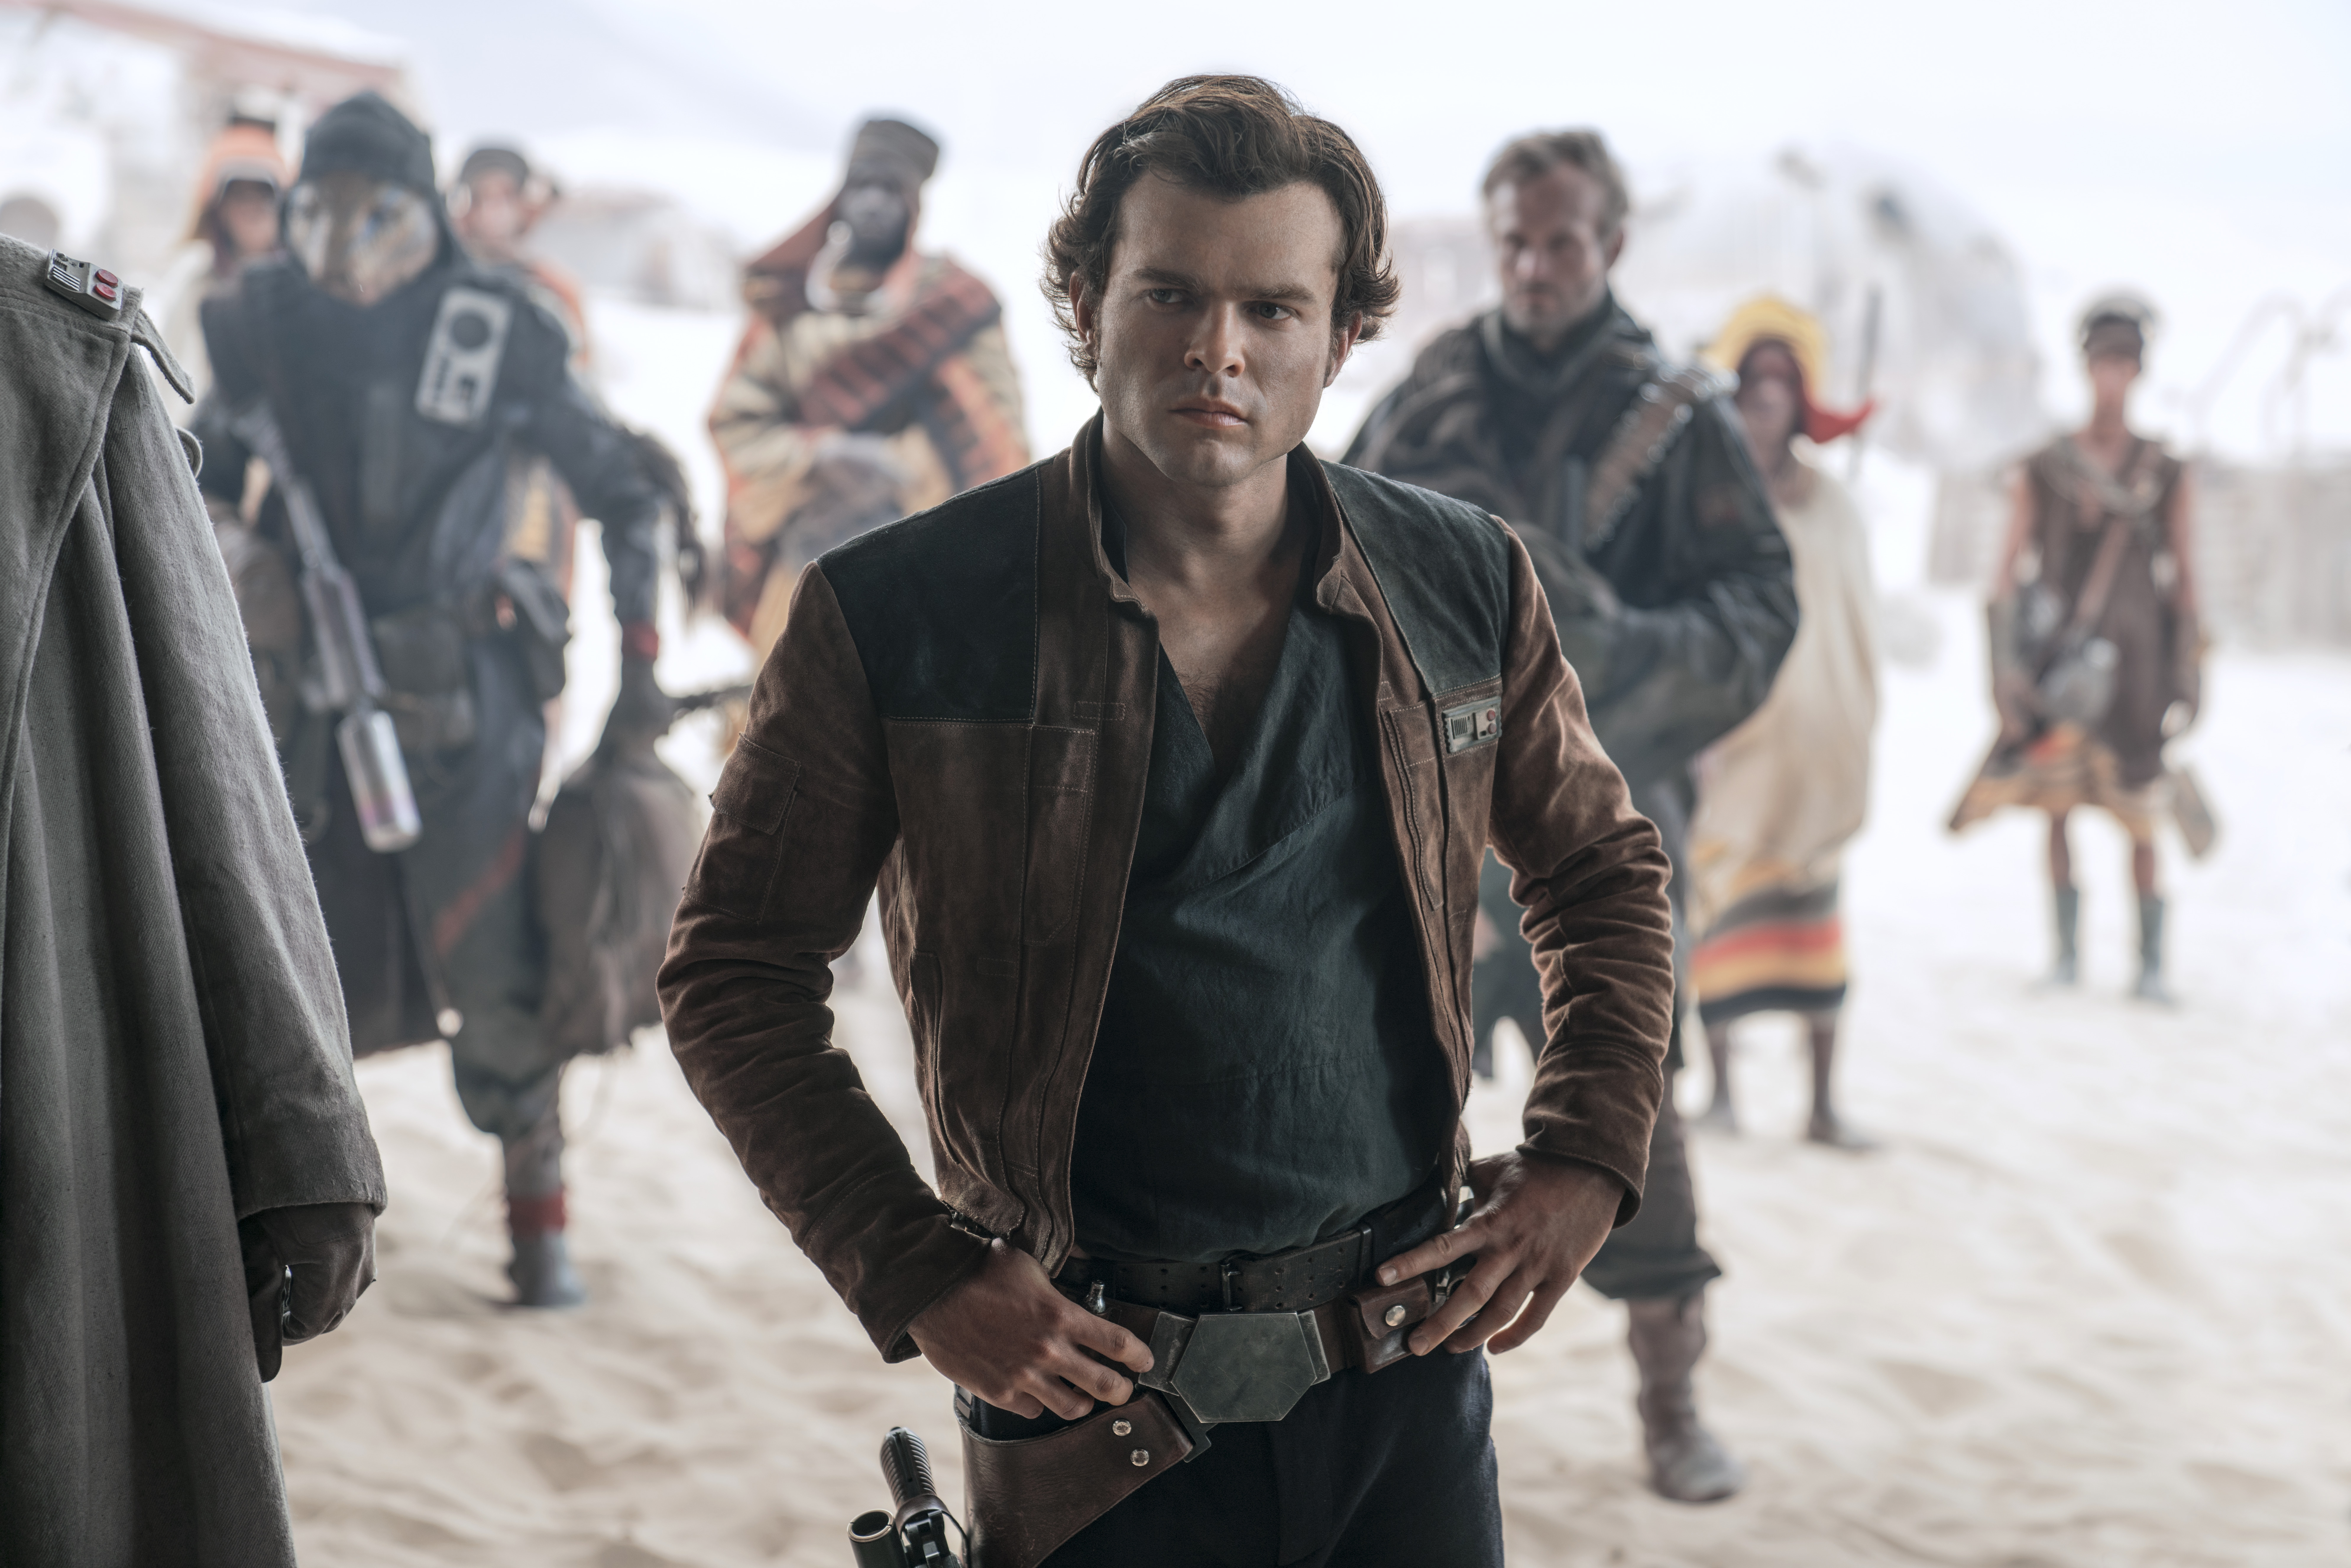 New Featurette, Becoming Solo, Released Ahead of Solo: A Star Wars Story